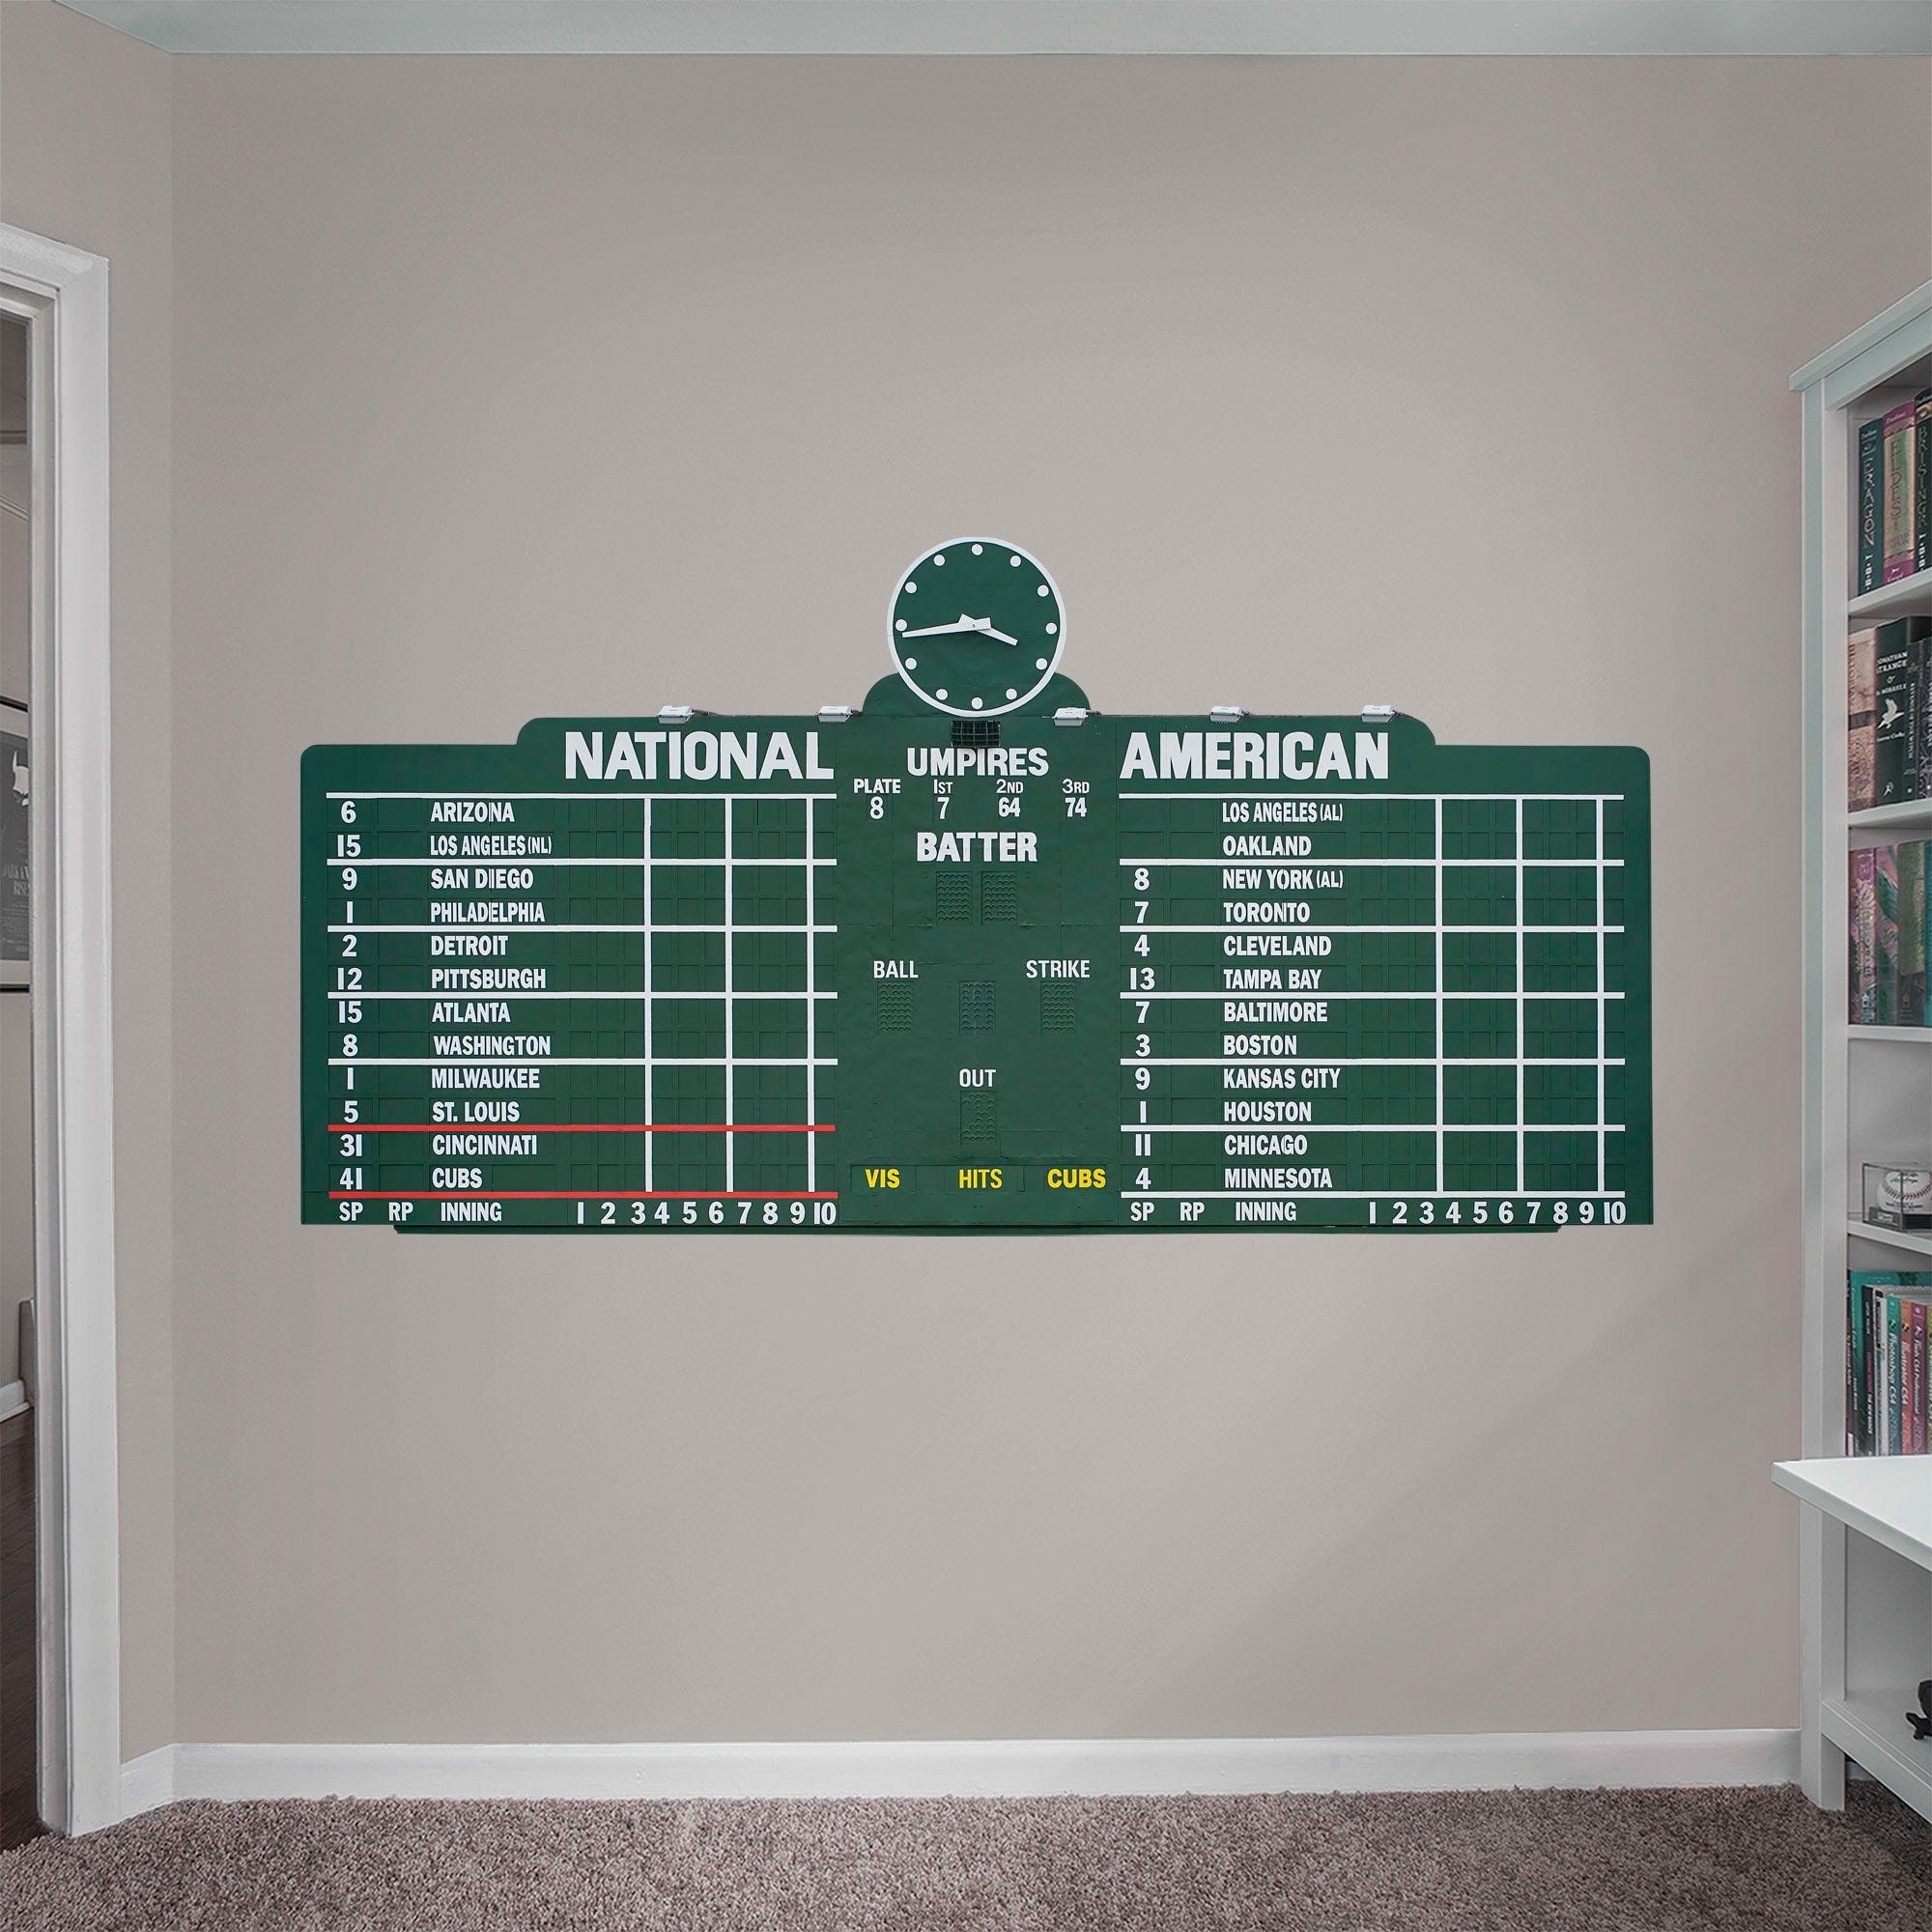 Chicago Cubs: Scoreboard - Officially Licensed MLB Removable Wall Decal Huge Decal + 1 Decal (78"W x 40"H) by Fathead | Vinyl